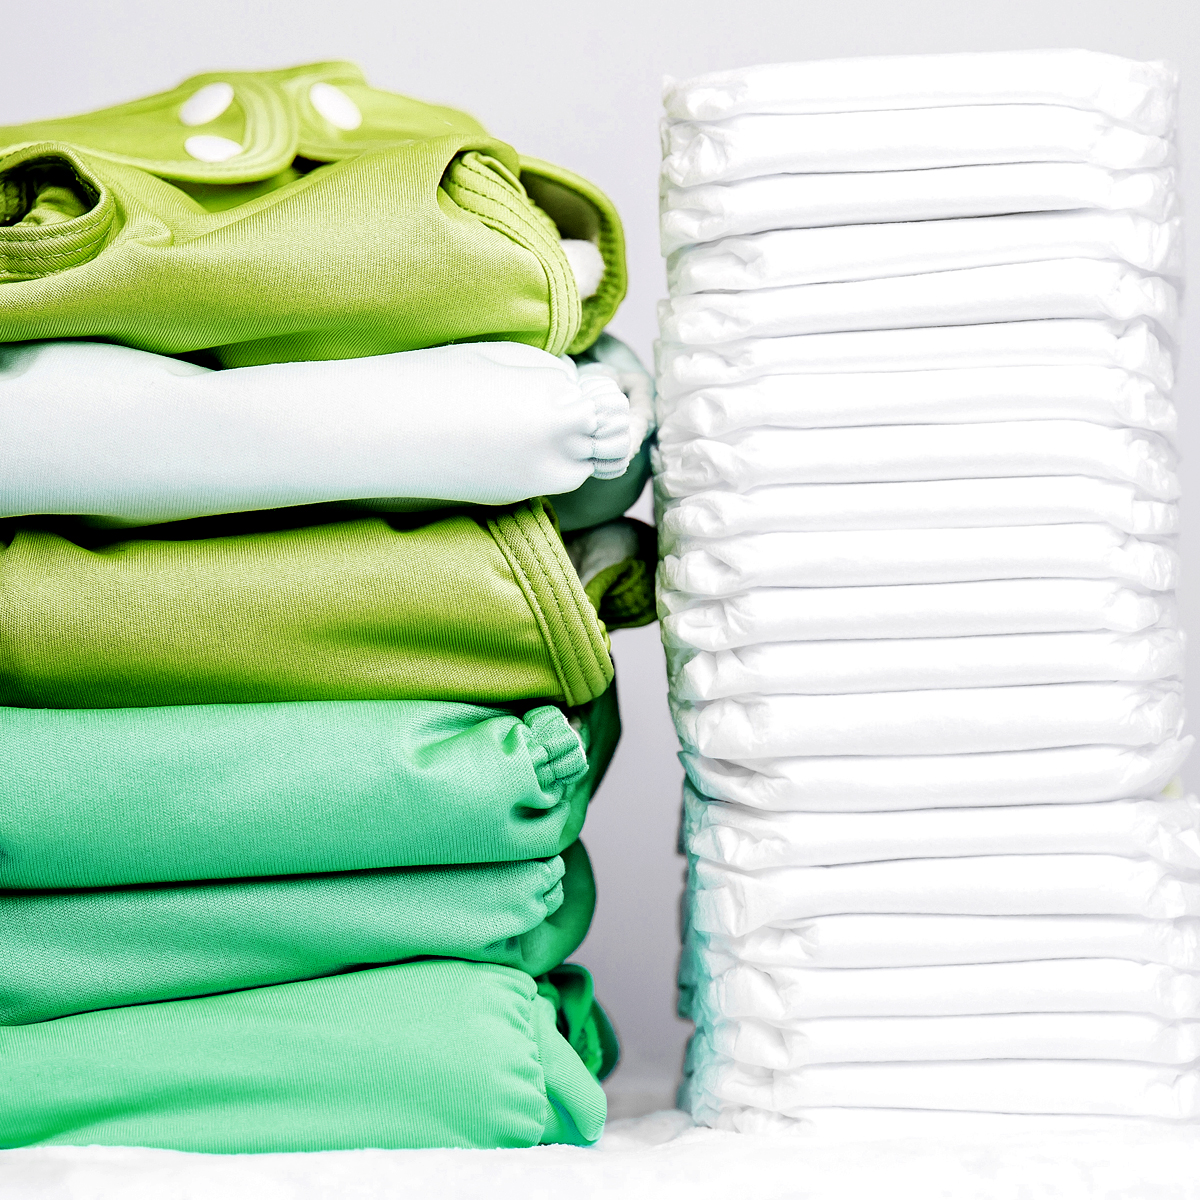 Reusable and disposable nappies